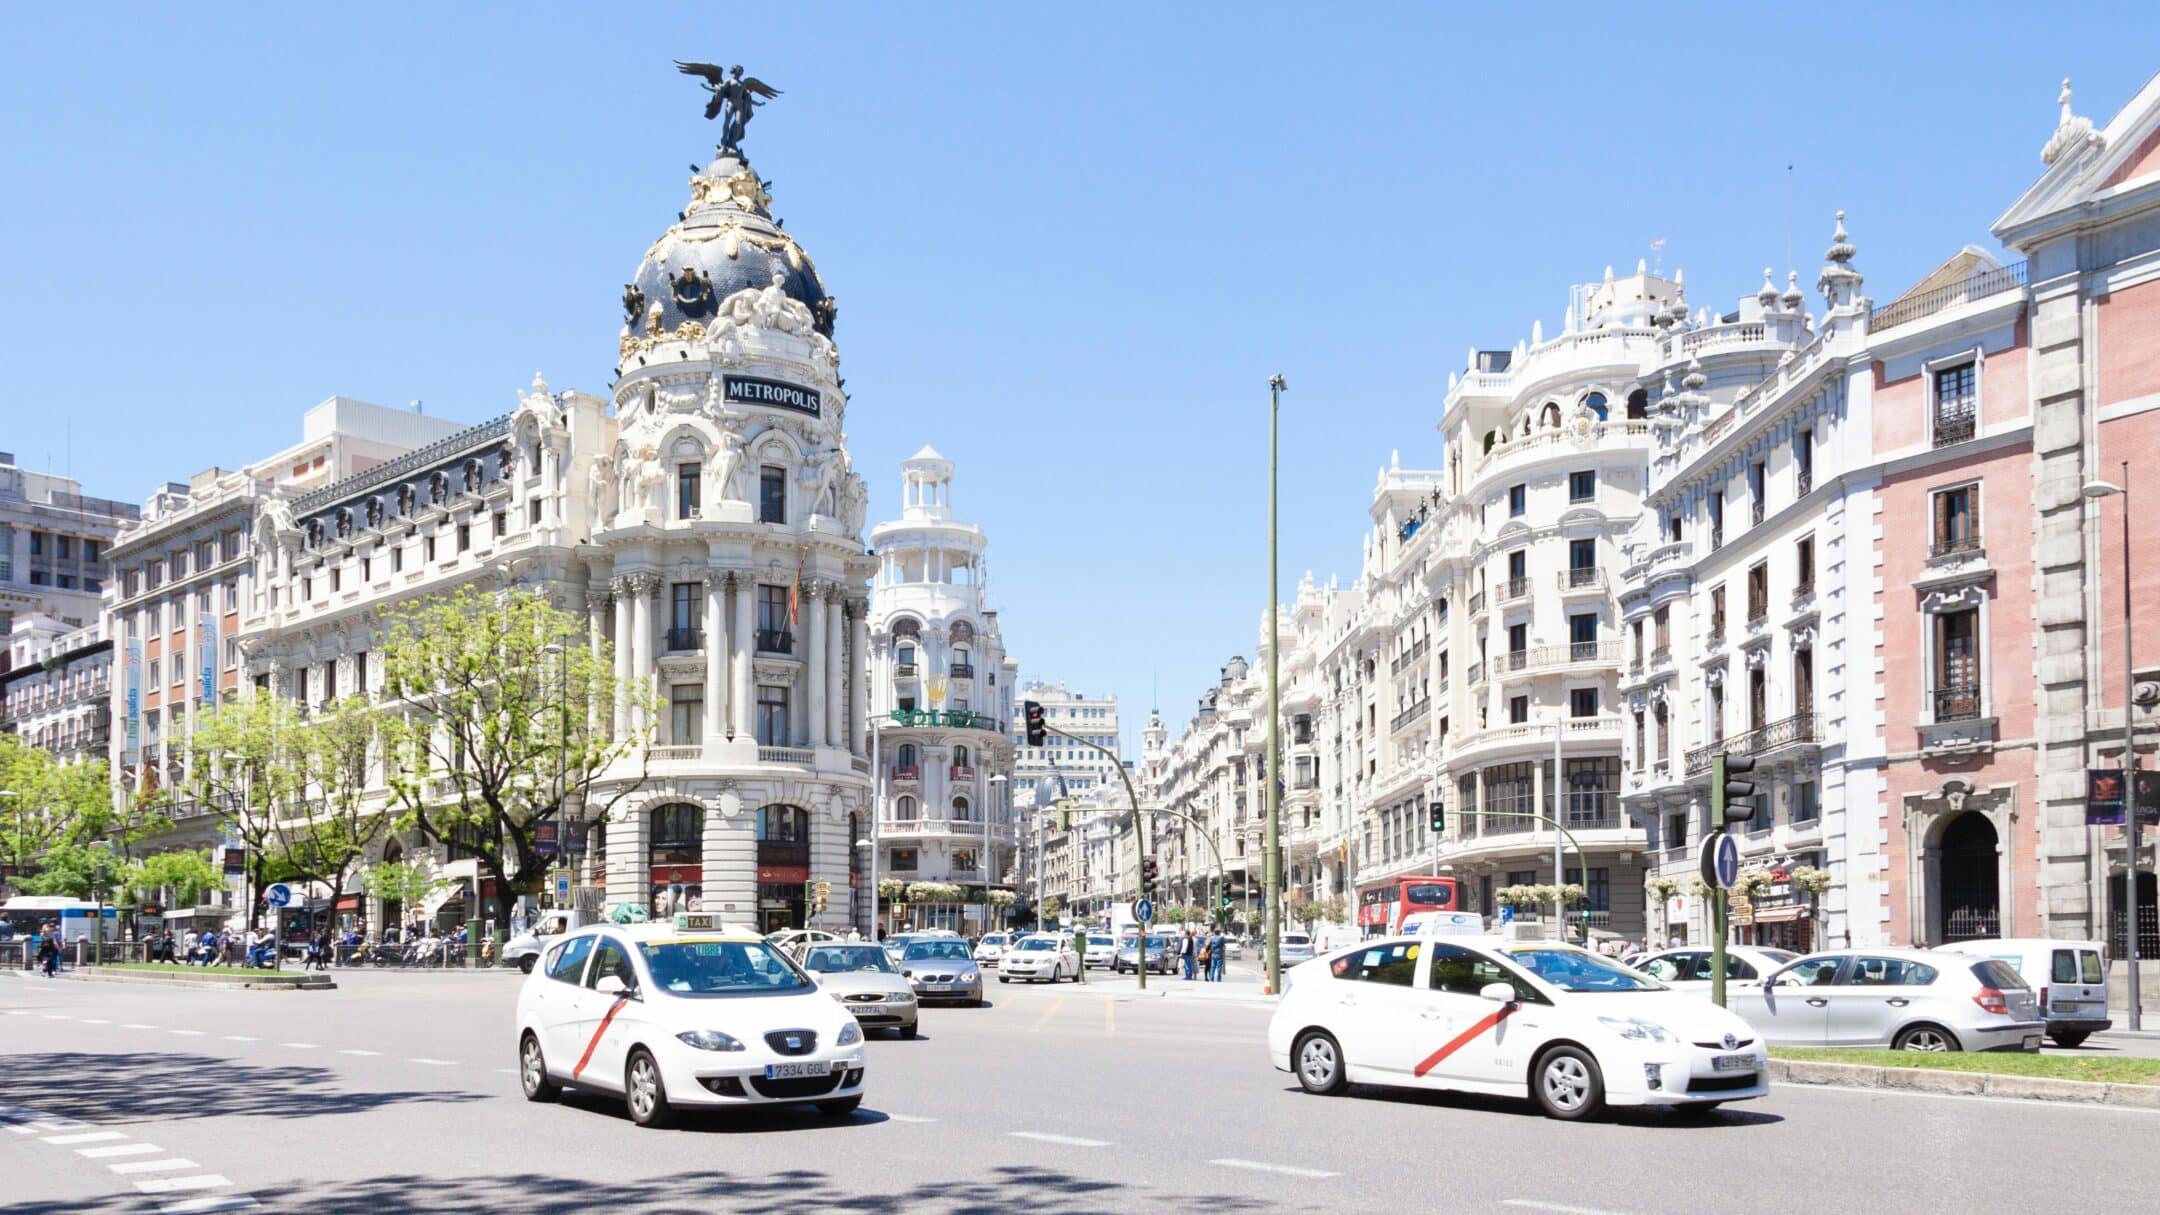 14 Reasons Why Moving to Madrid will Change your Life